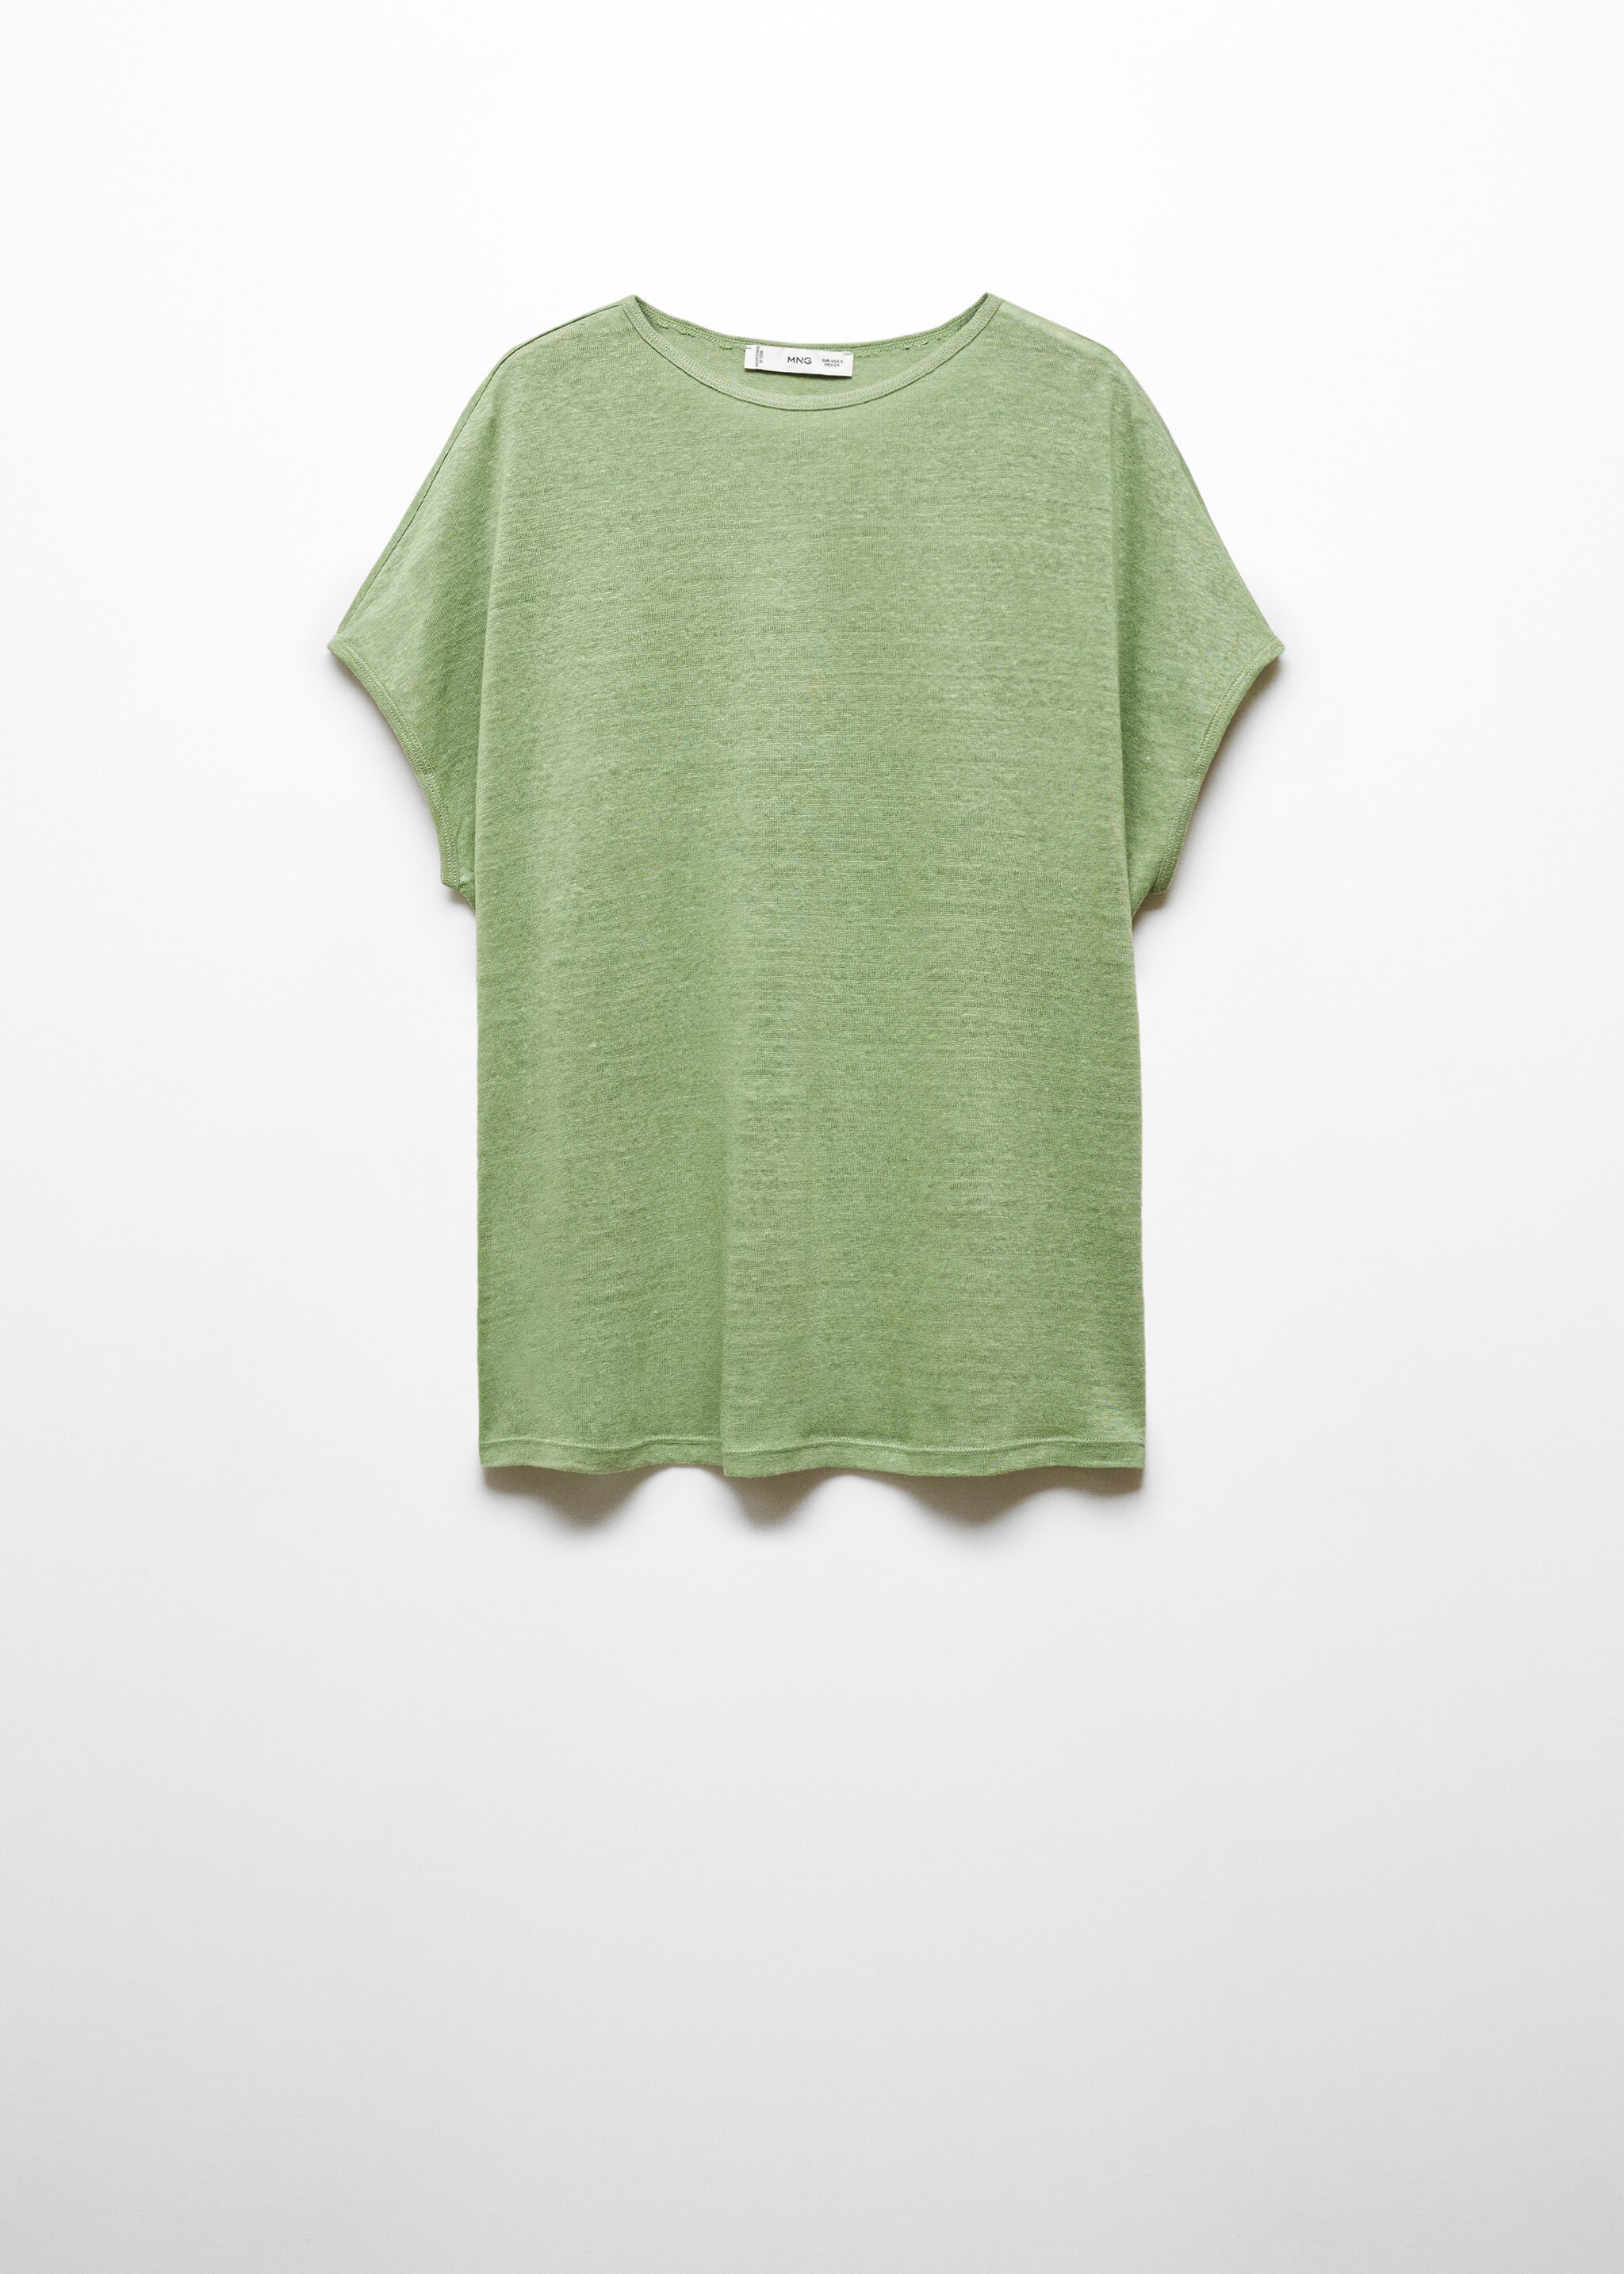 100% linen t-shirt - Article without model